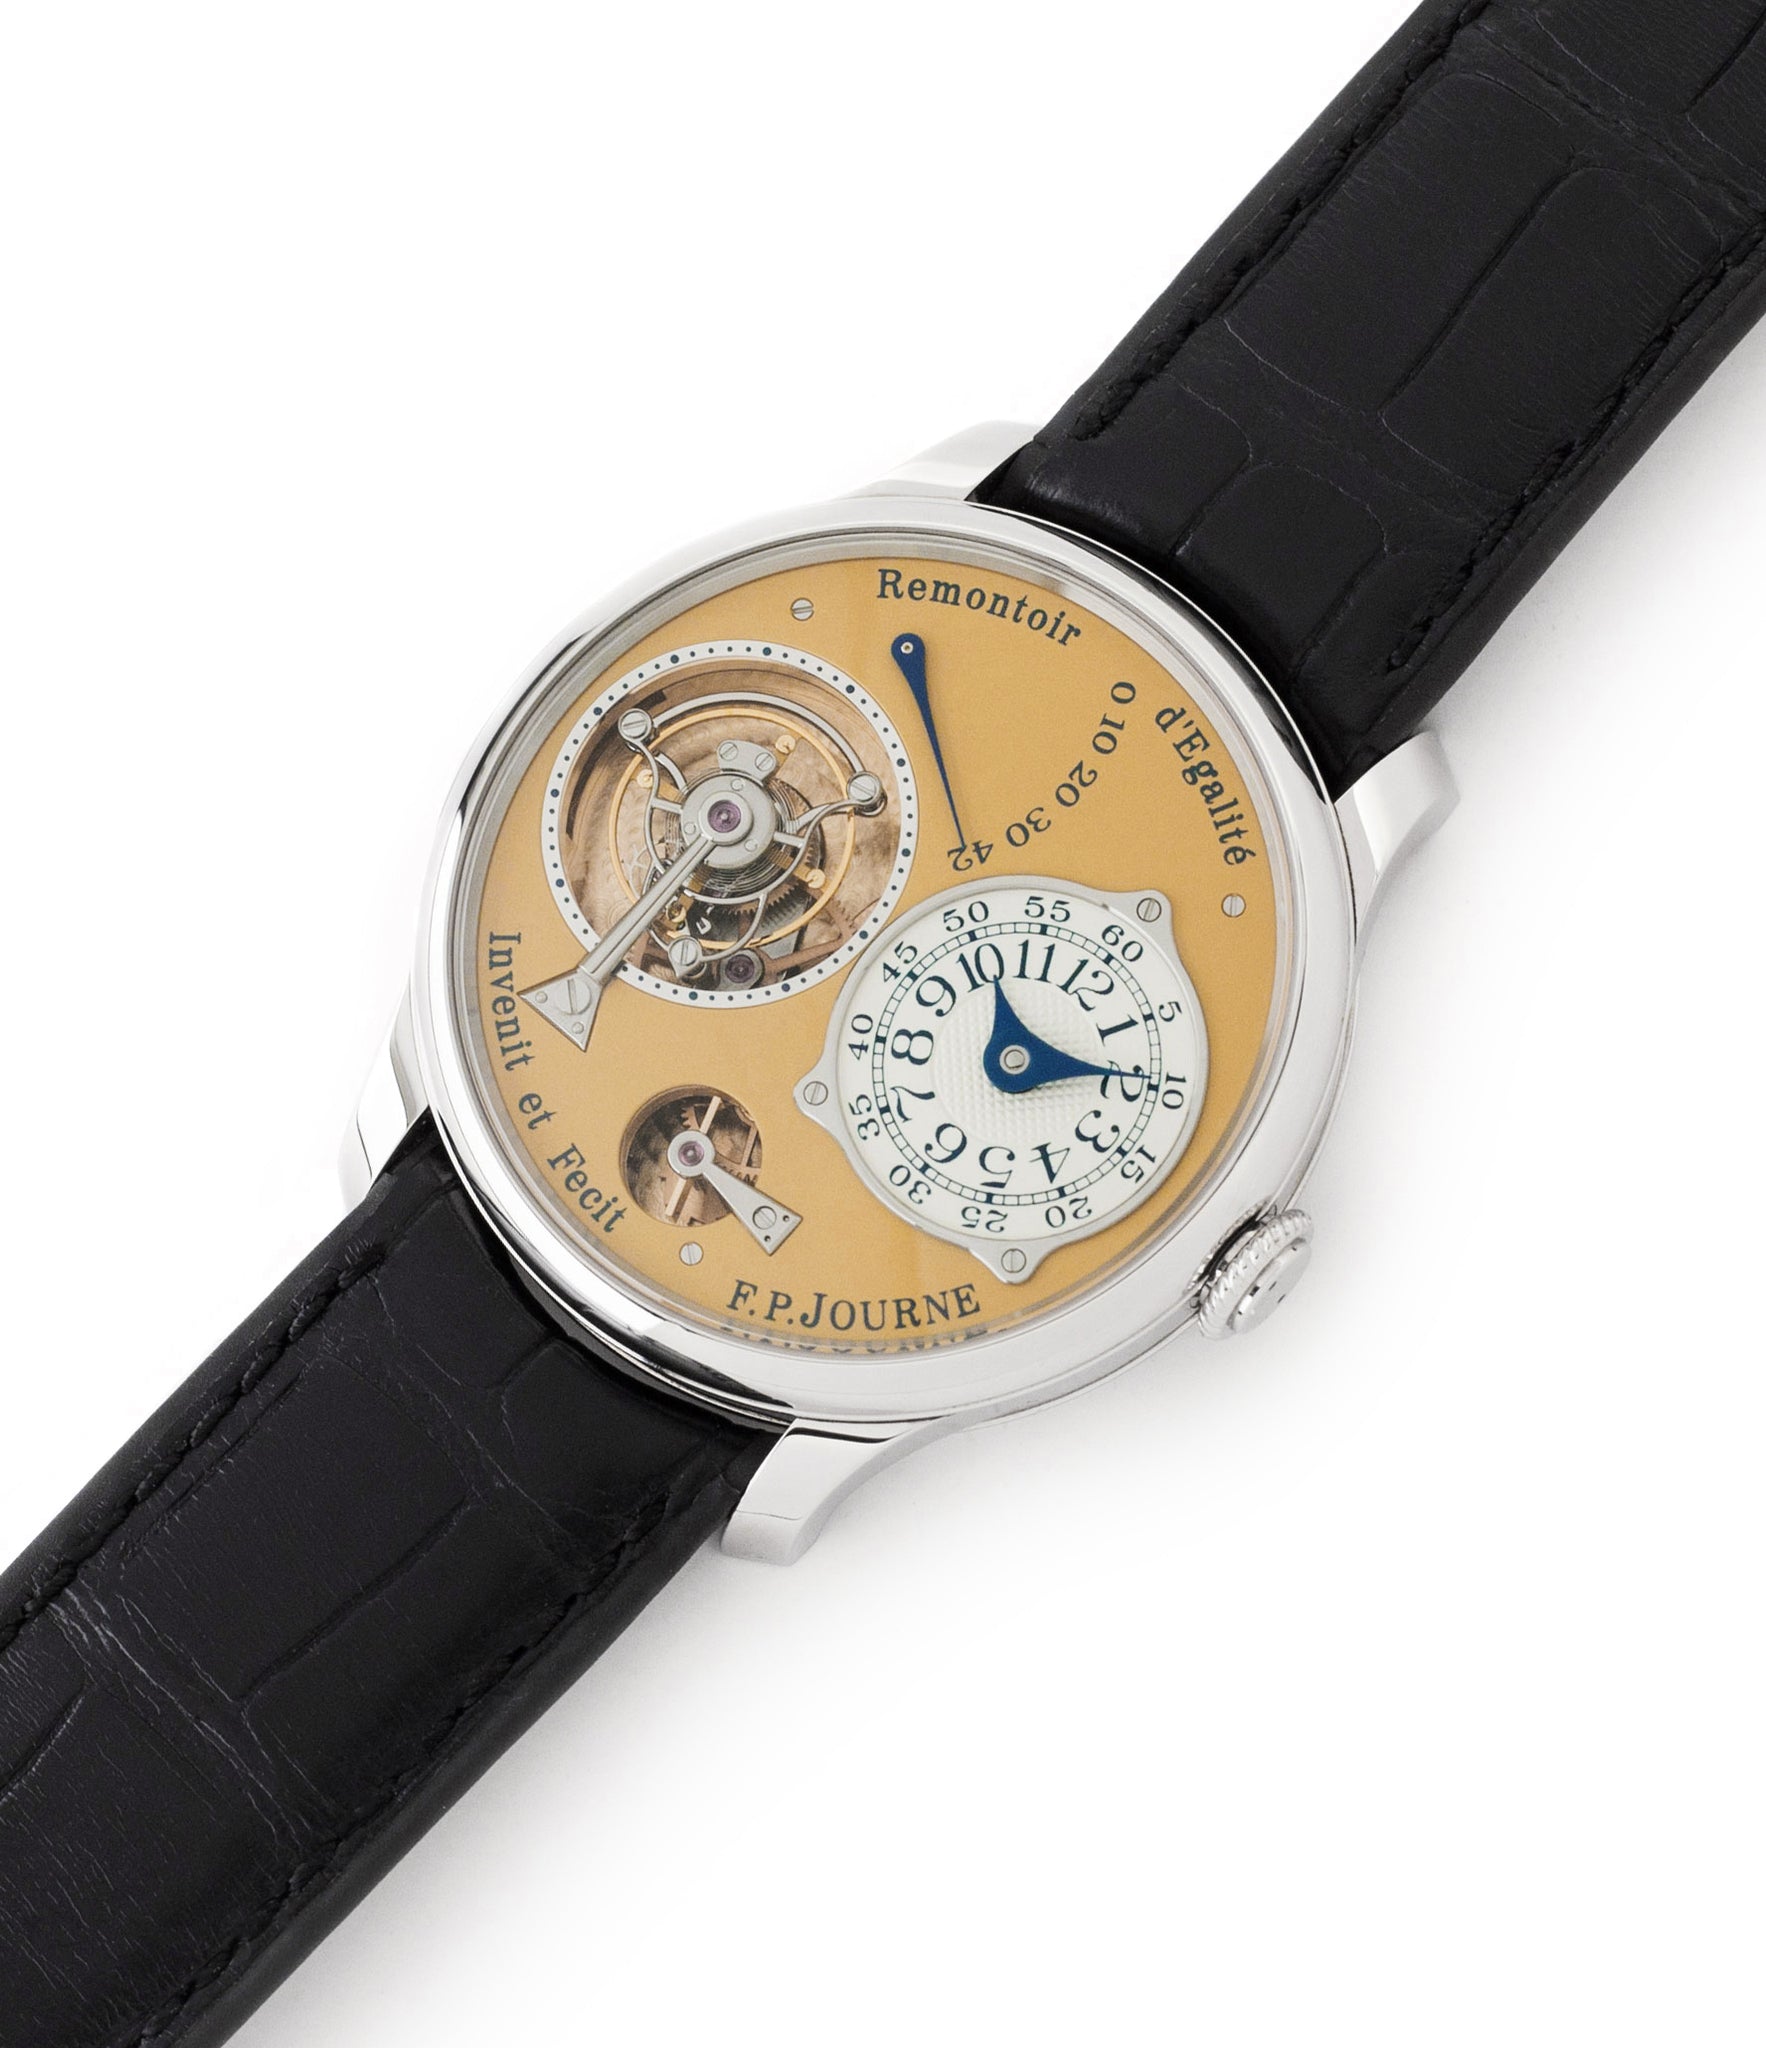 38 mm steel F. P. Journe Tourbillon Souverain steel dress watch for sale online at A Collected Man London UK approved seller of independent watchmakers